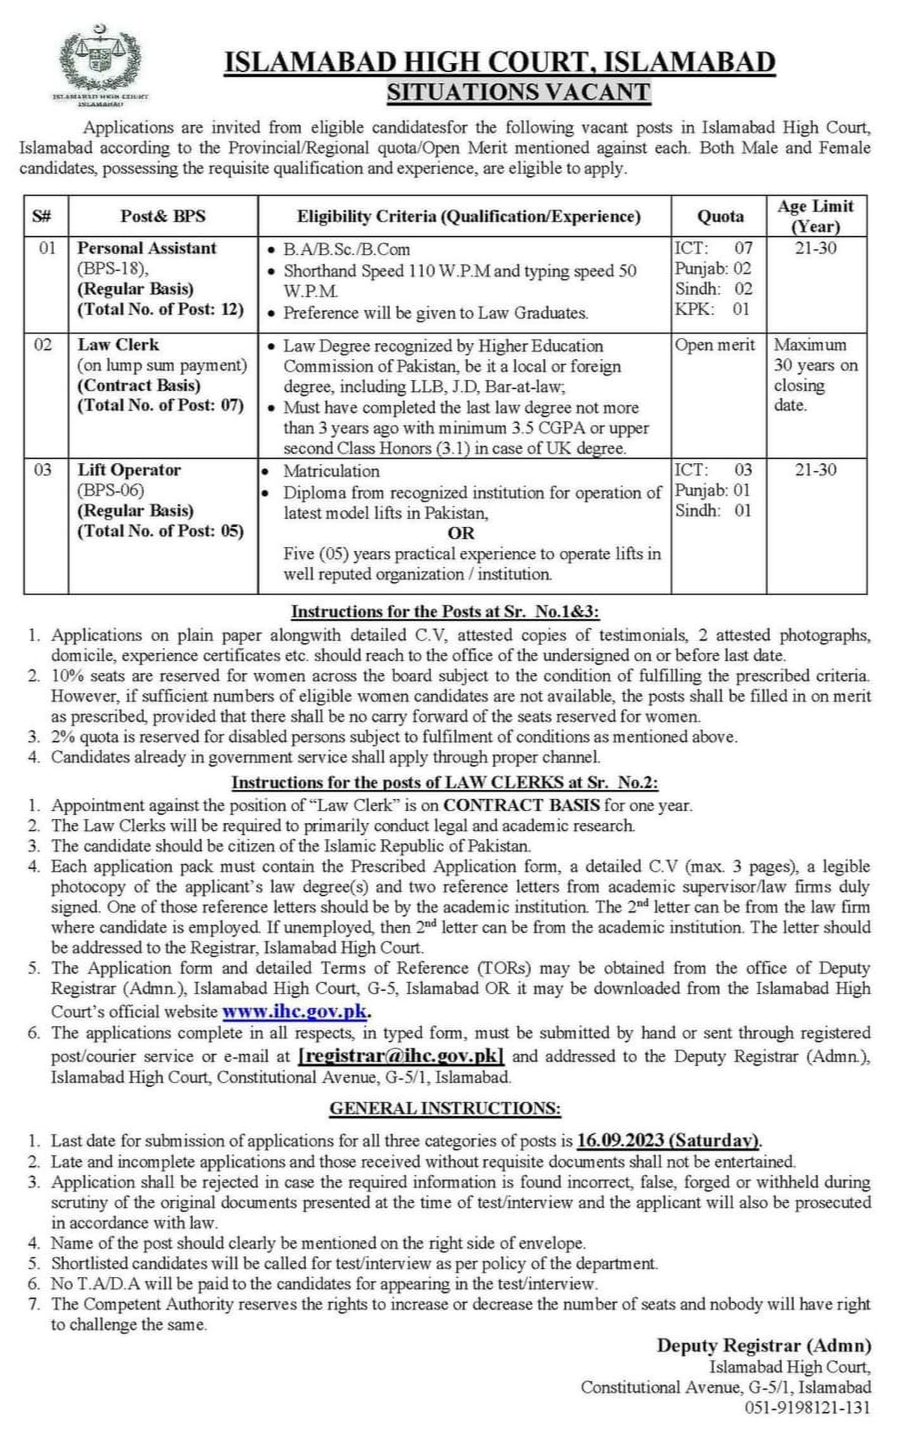 Islamabad High Court Jobs 2023 Hiring for Assistants, Law Clerks and Operators